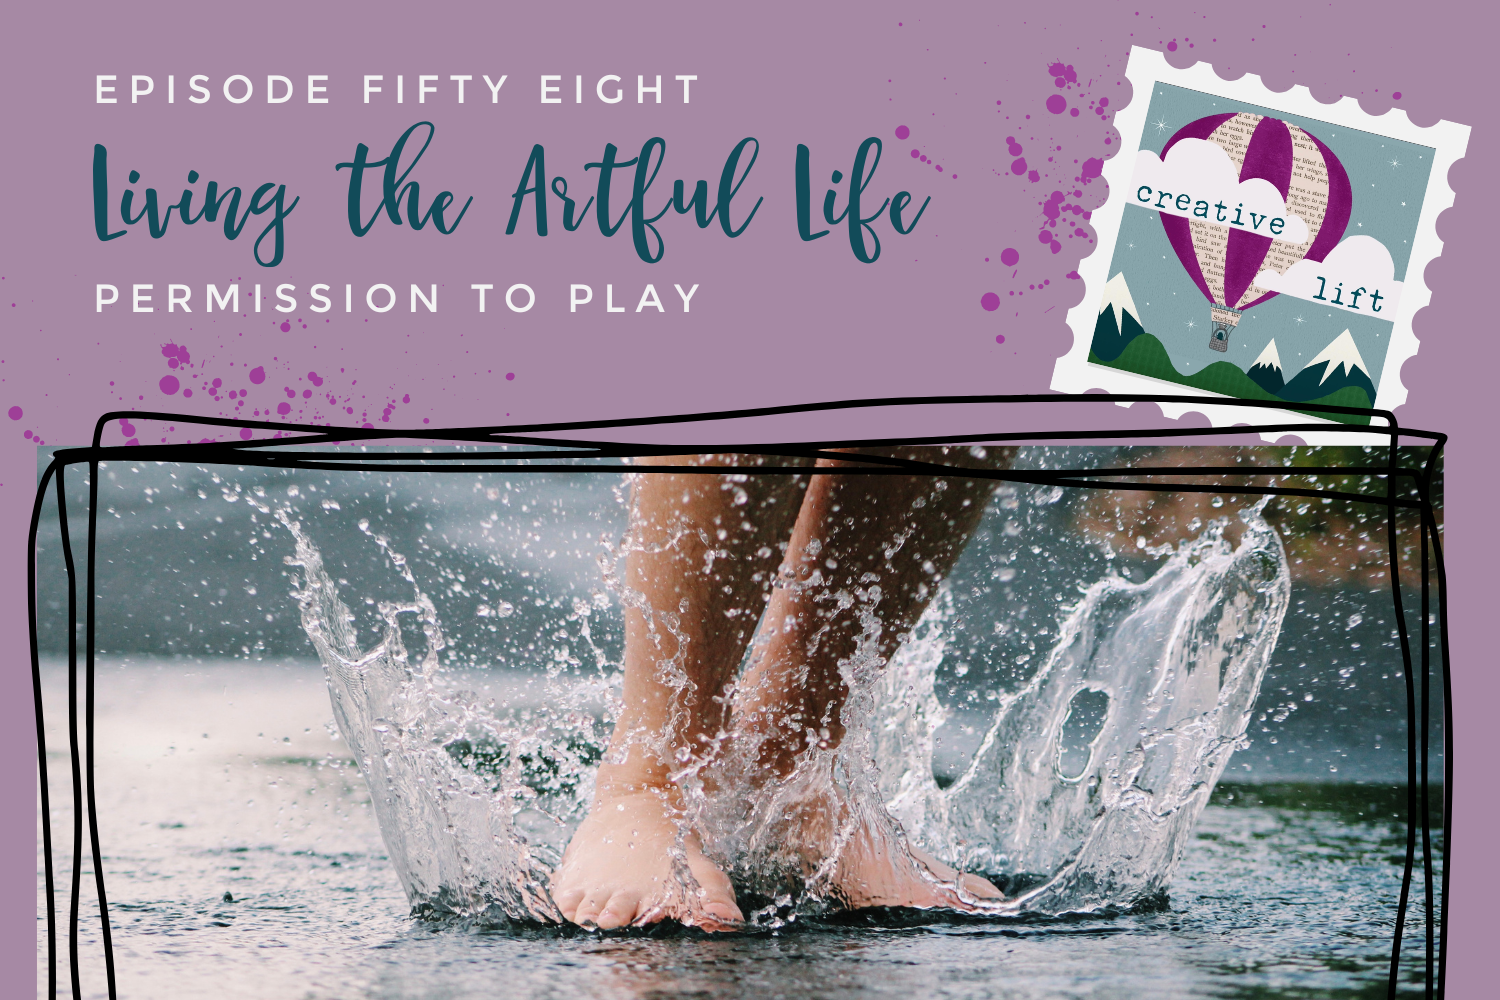 Creative Lift Episode 58- Living the Artful Life: Permission to Play